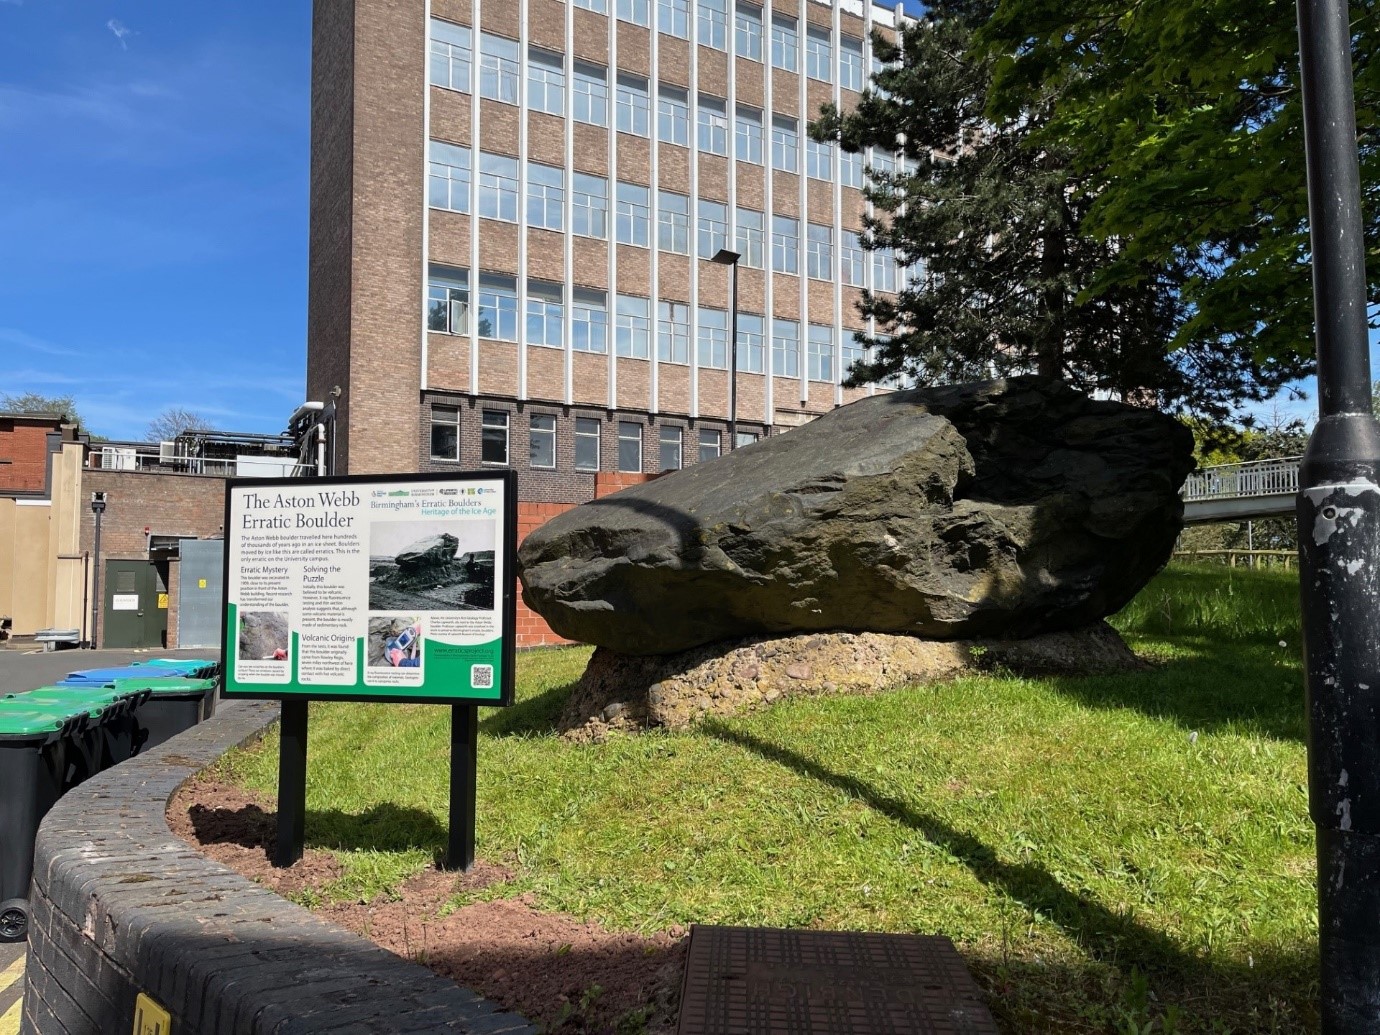 An image of the glacial erratic and new sign on the University campus.